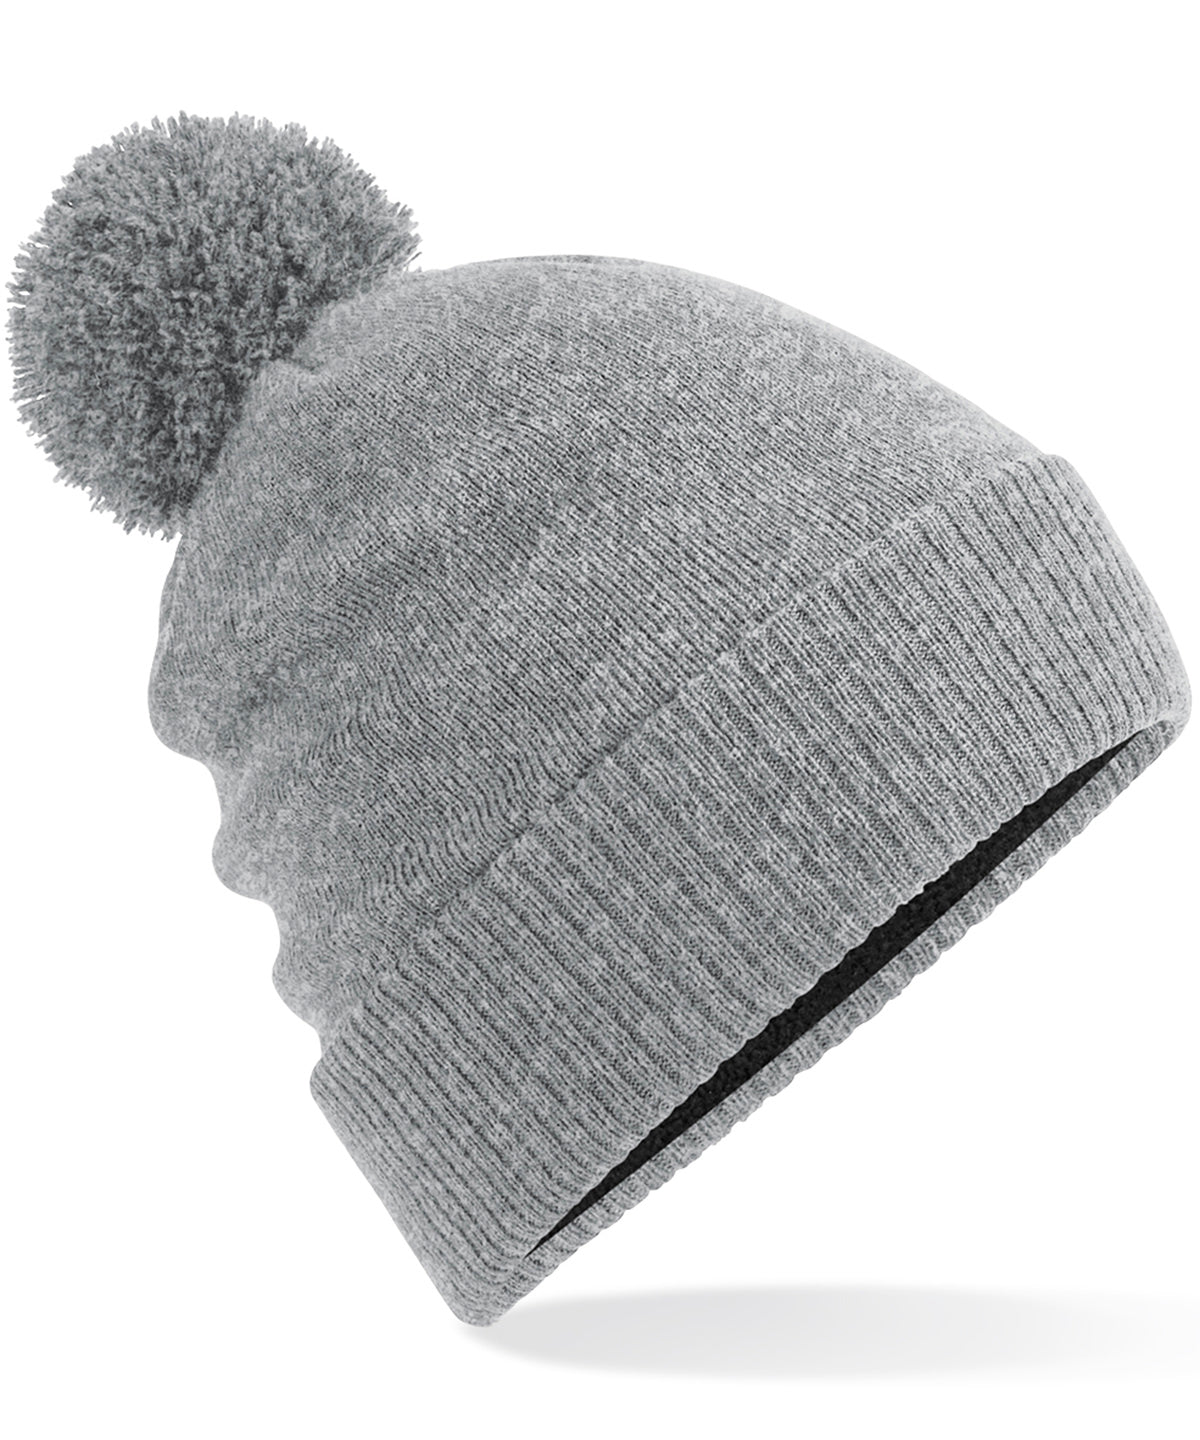 Personalised Hats - Heather Grey Beechfield Water-repellent thermal Snowstar® beanie